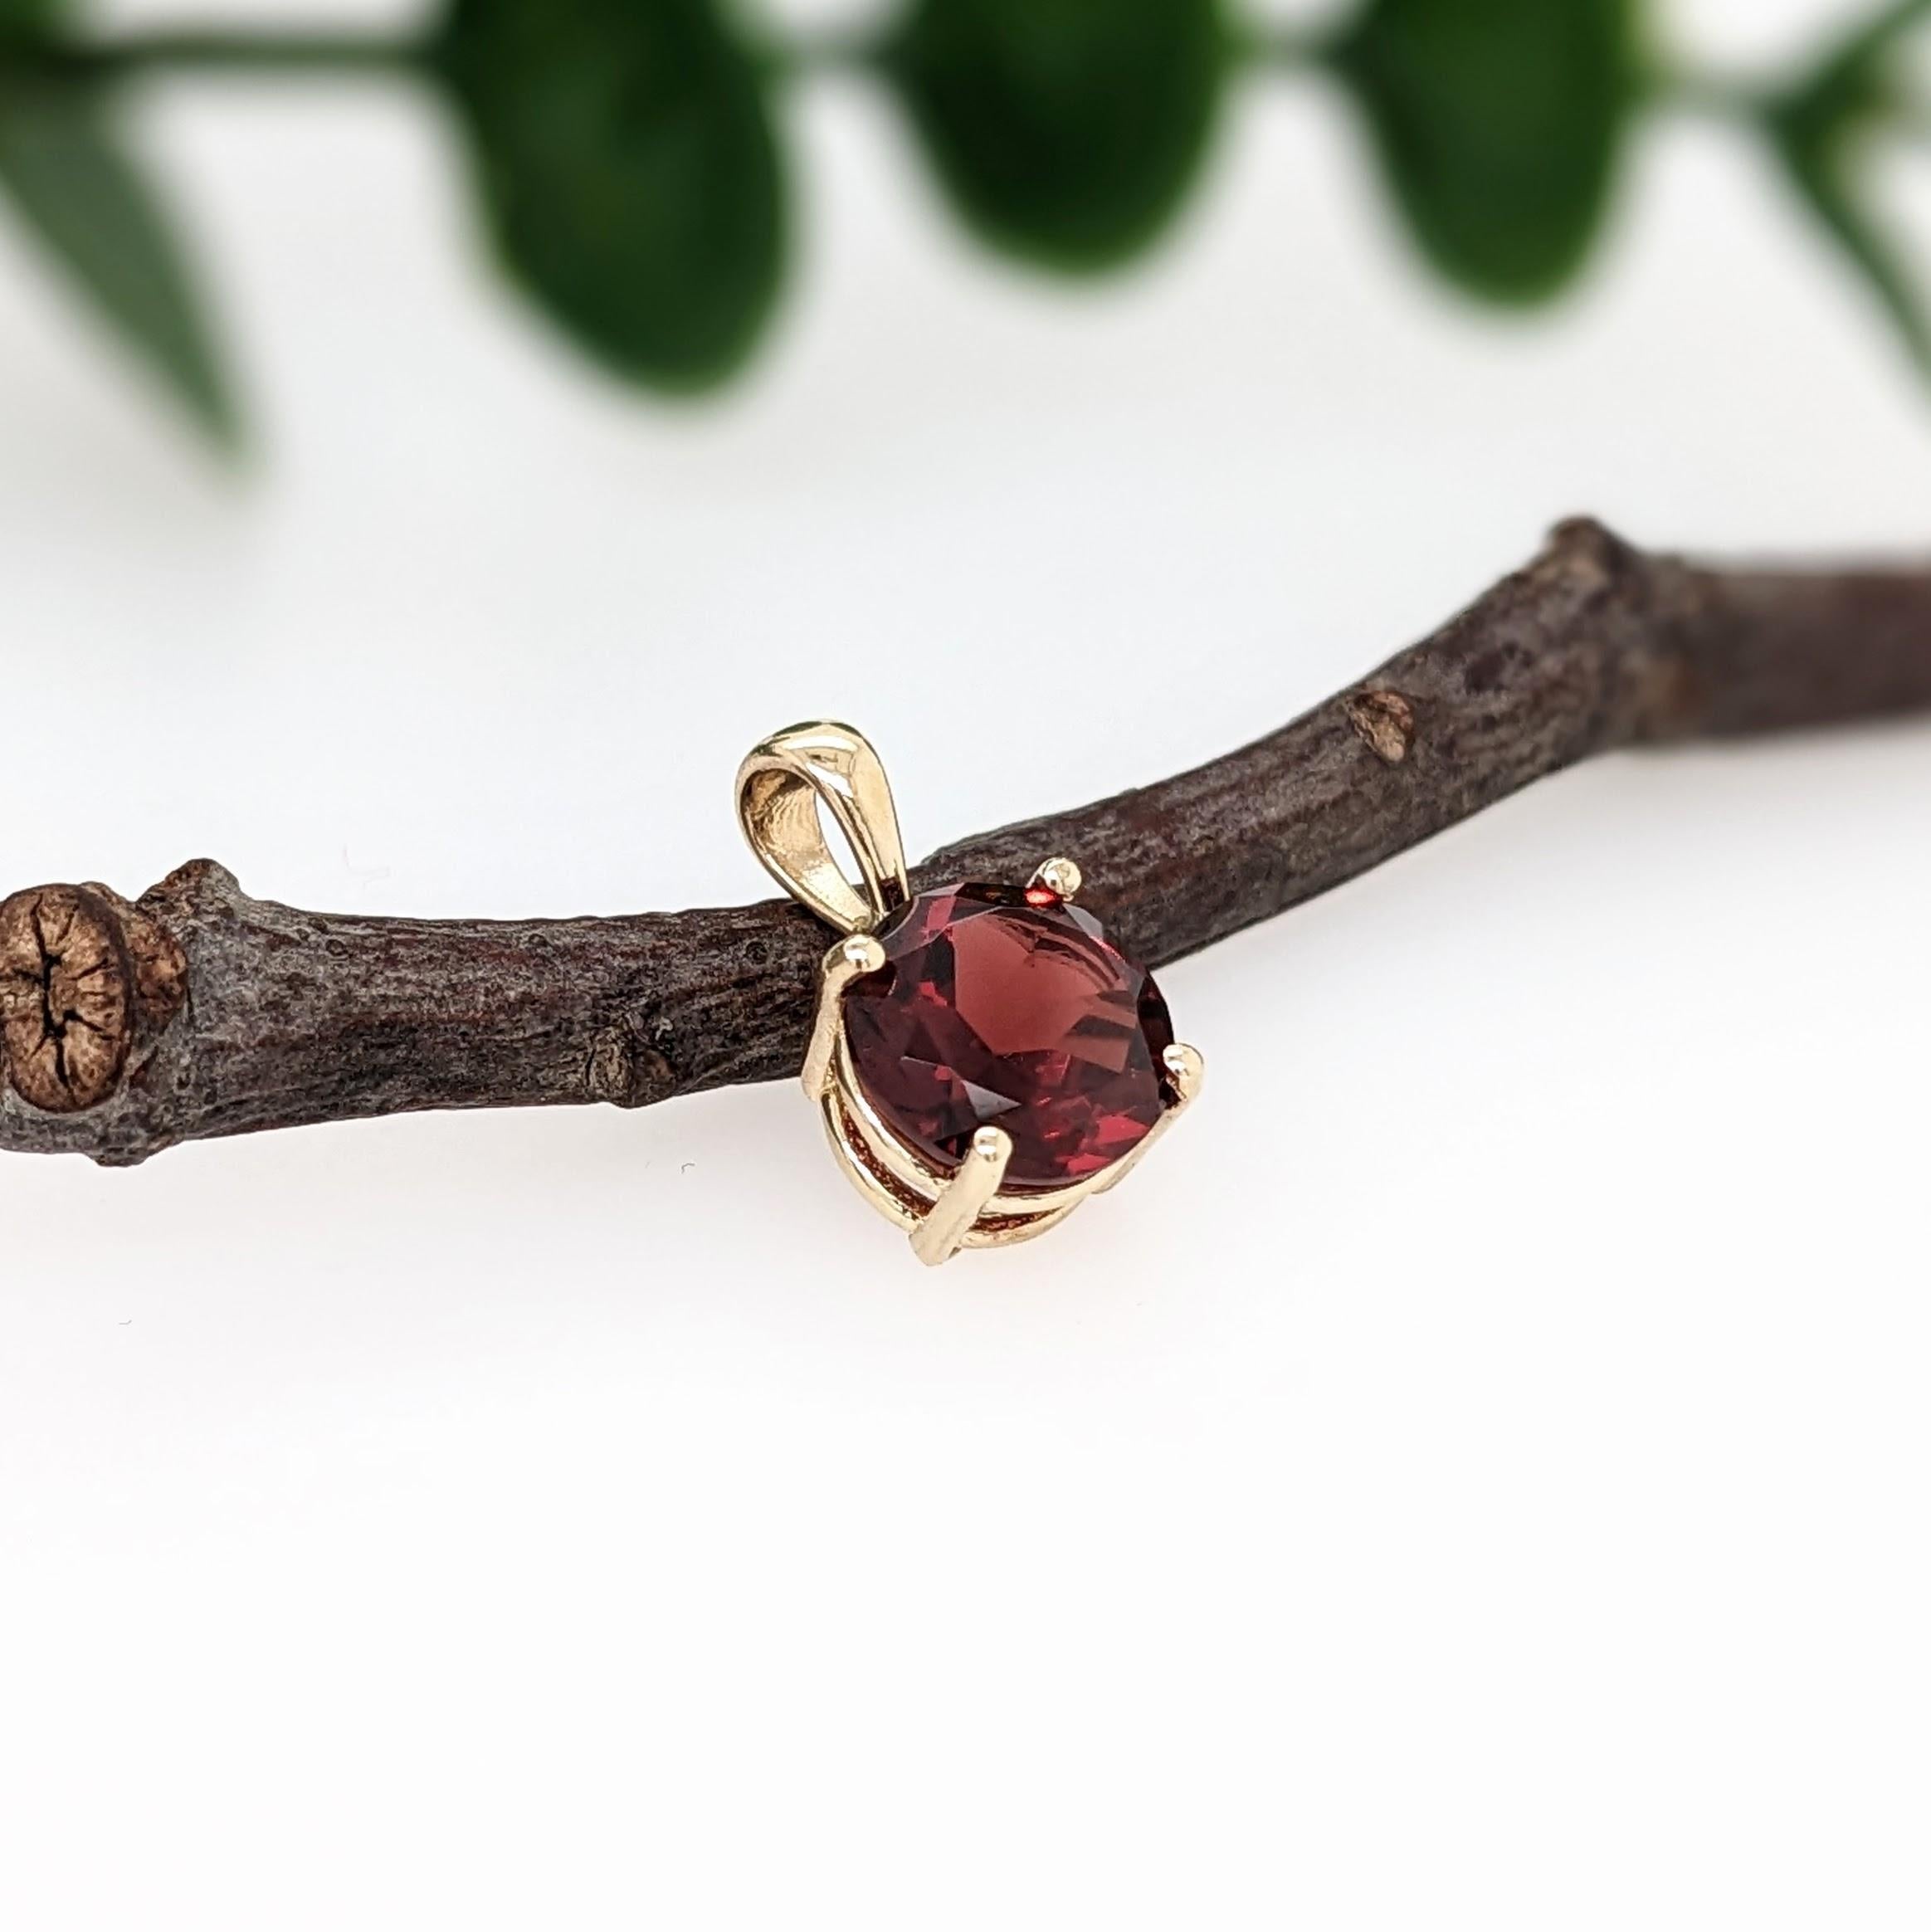 If you need something simple but still beautiful for everyday wear then this is your pendant! This precious rhodolite would pair great with other jewelry or just on its own :)

Specifications

Item Type: Ring
Stone: Garnet
Treatment: